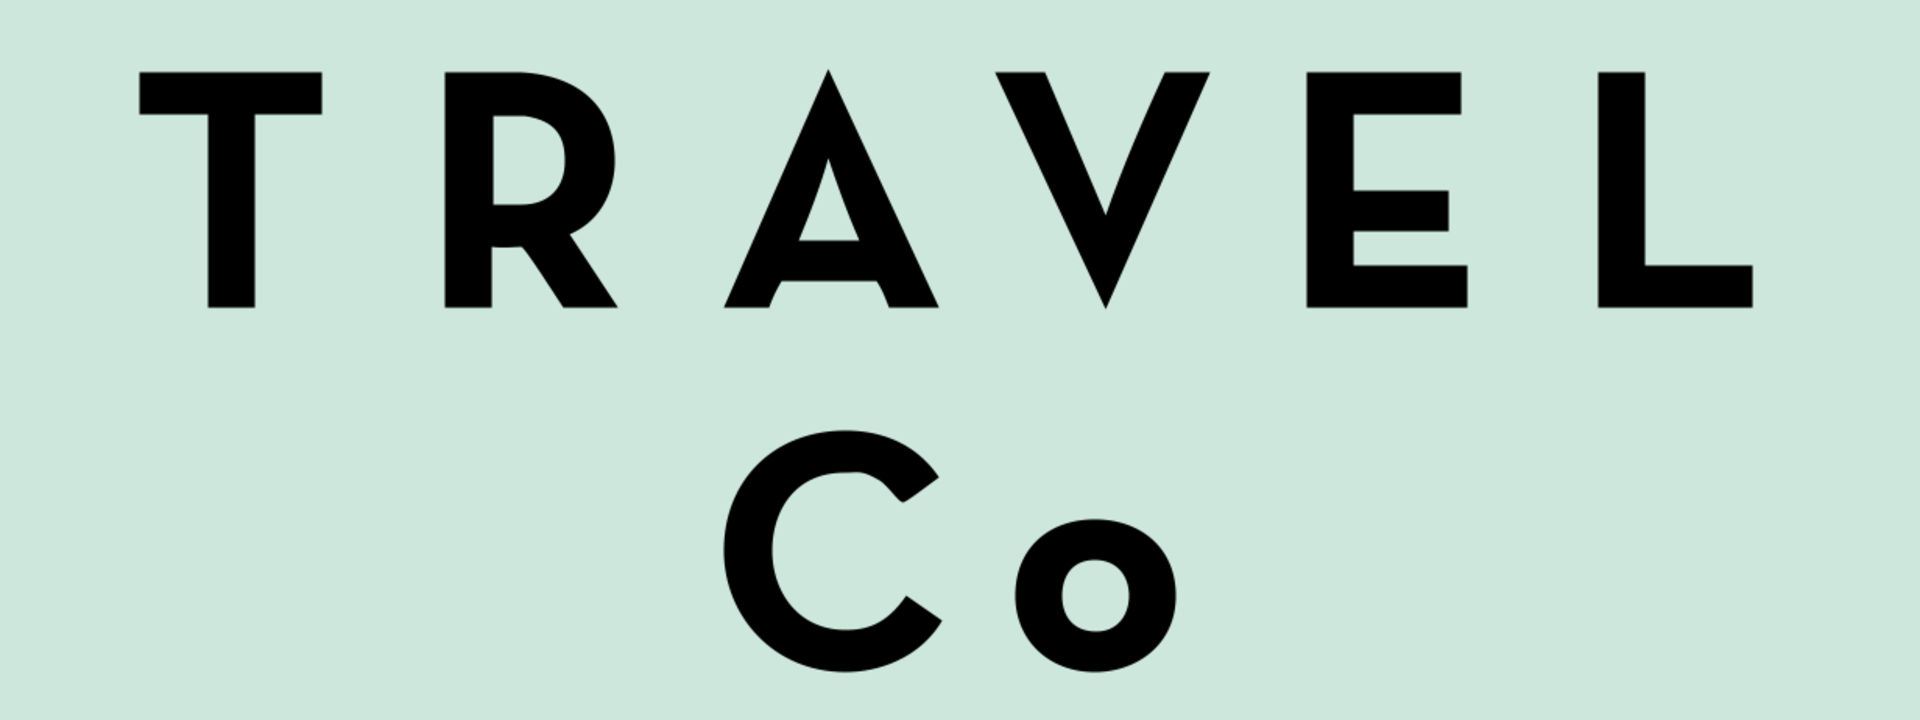 thetravelco-logo-large.fw_.png